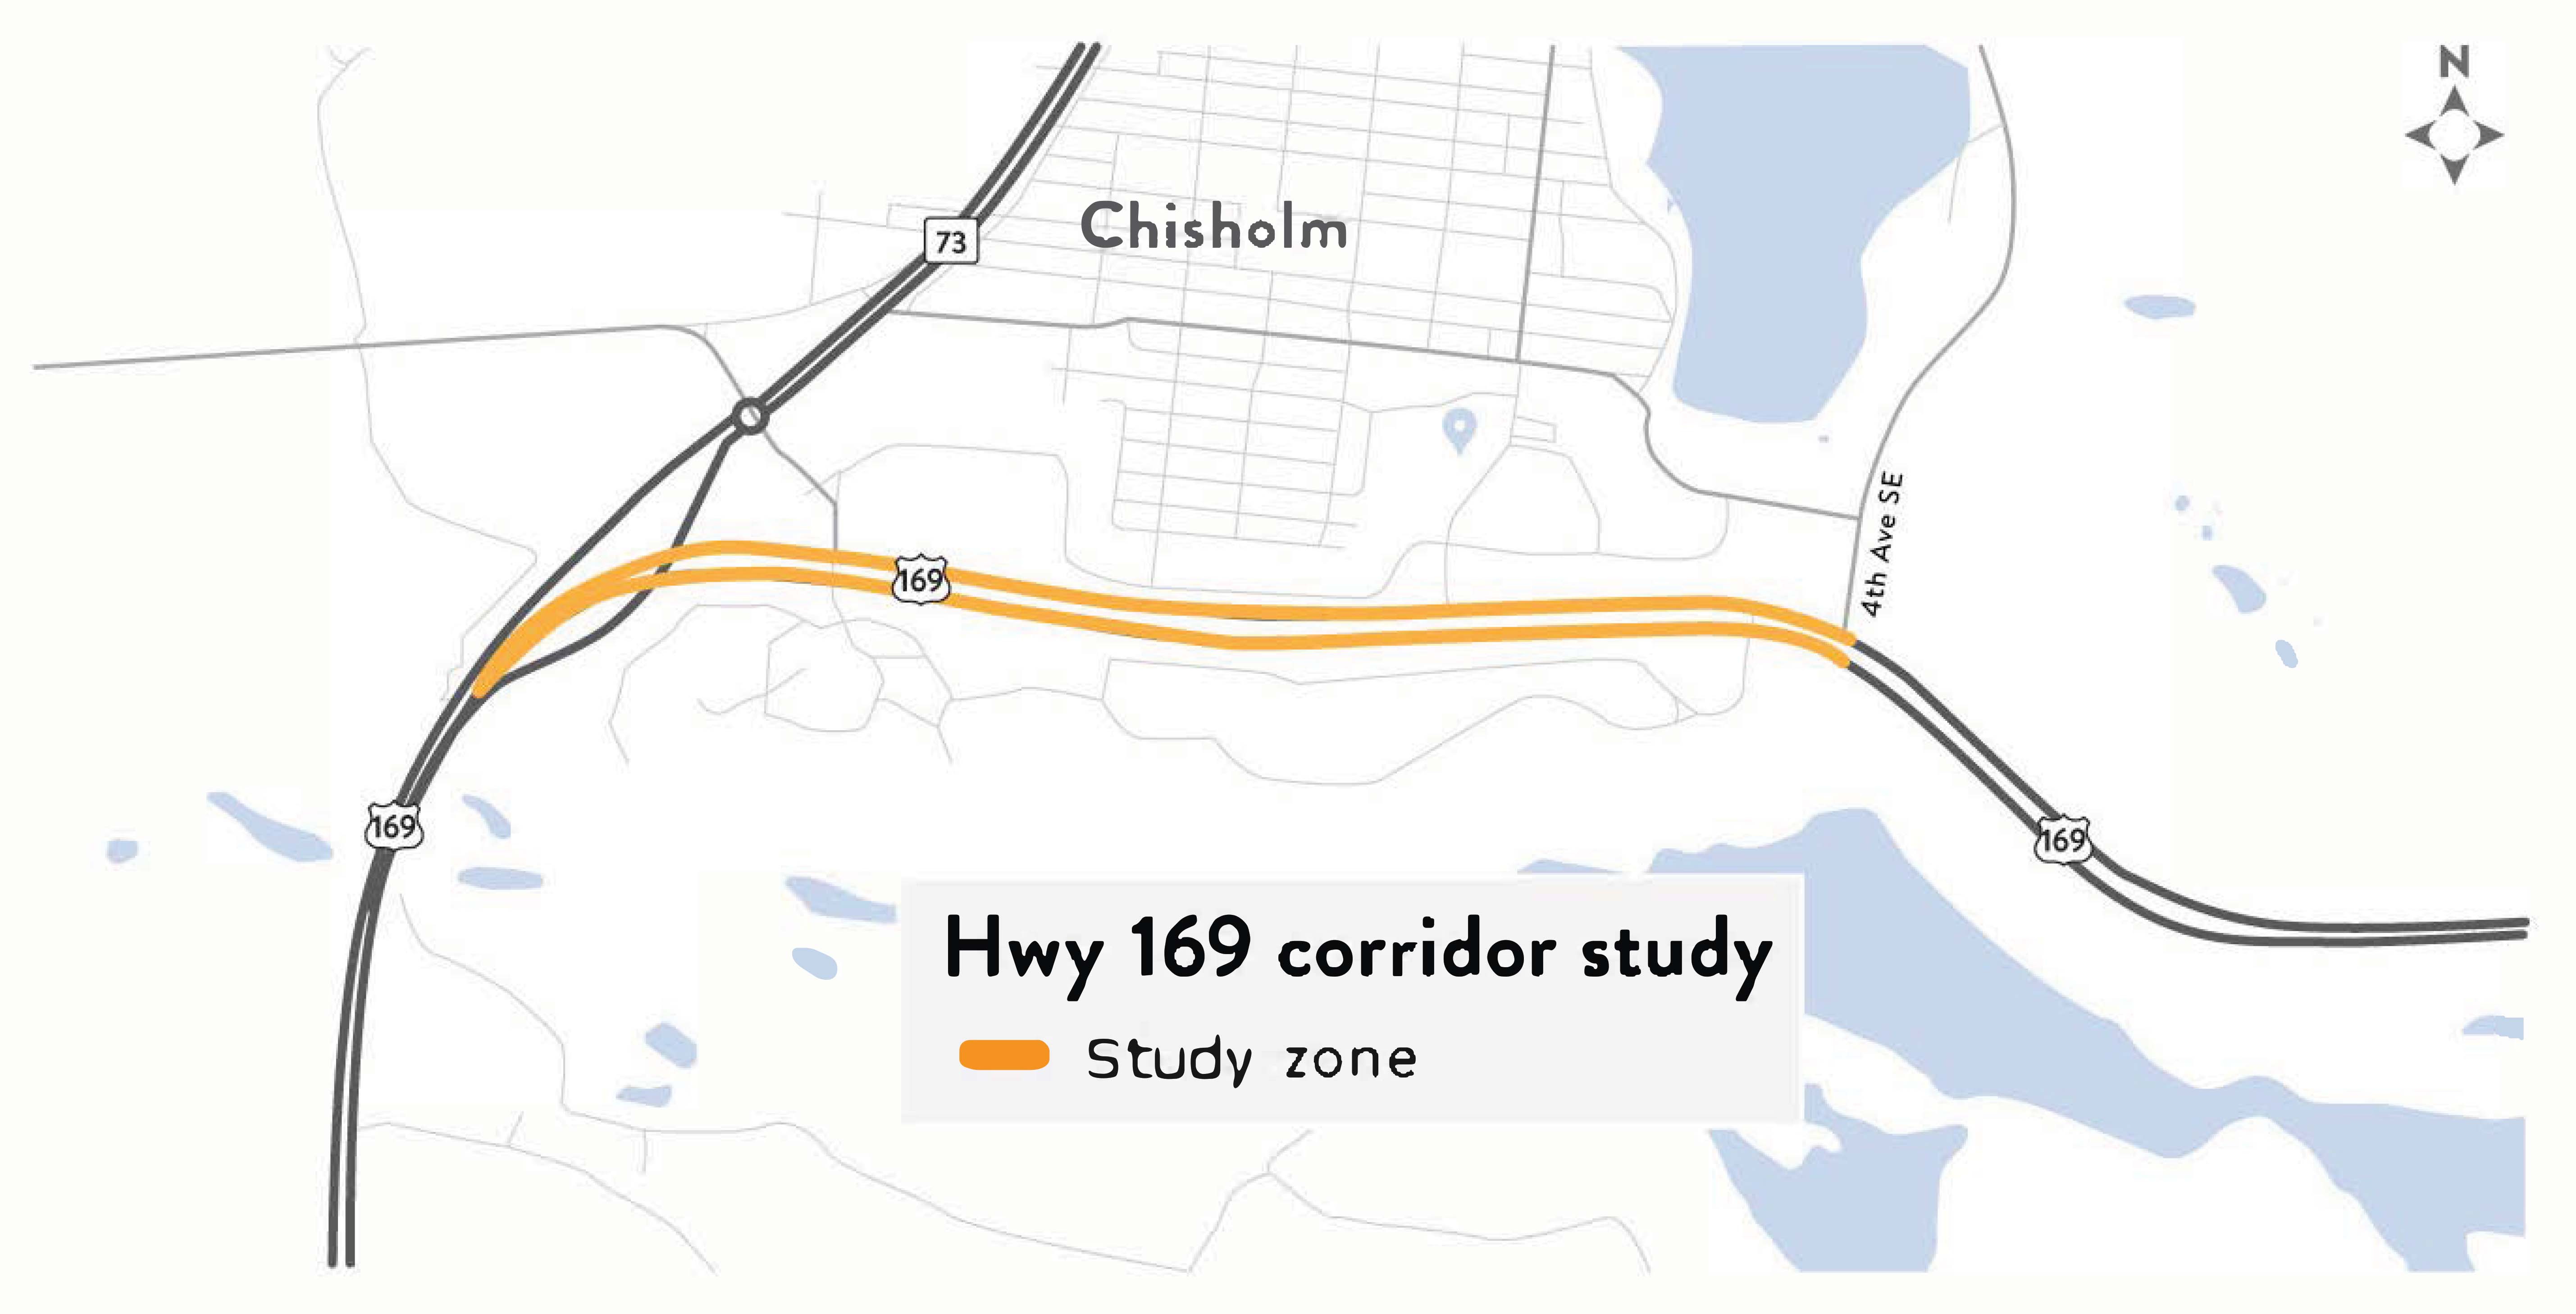 A rendering of the Hwy 169 corridor study near Chisholm.